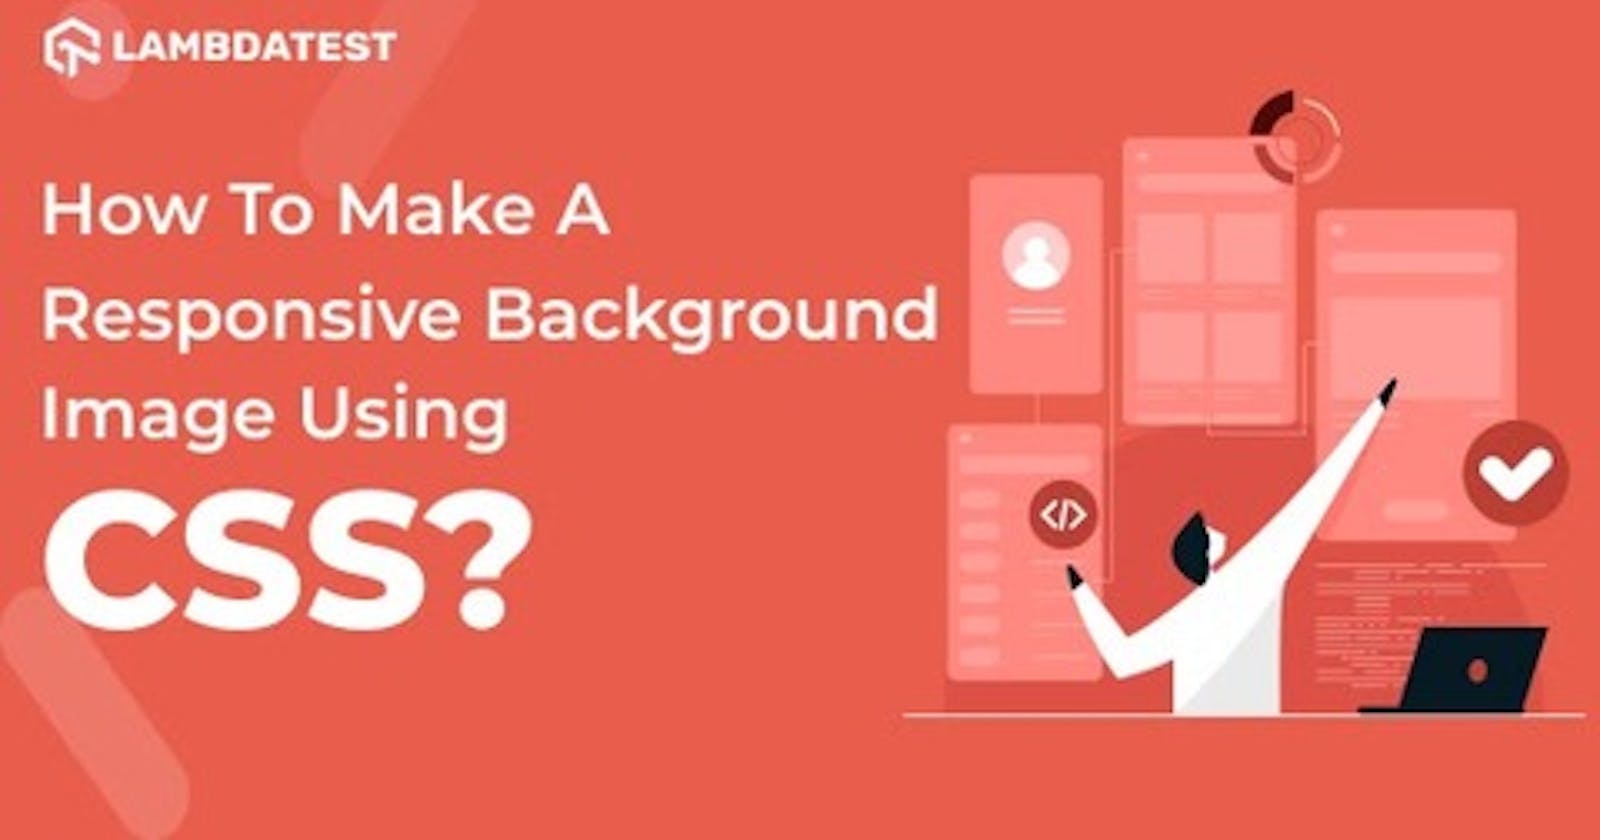 How To Make A Responsive Background Image Using CSS?